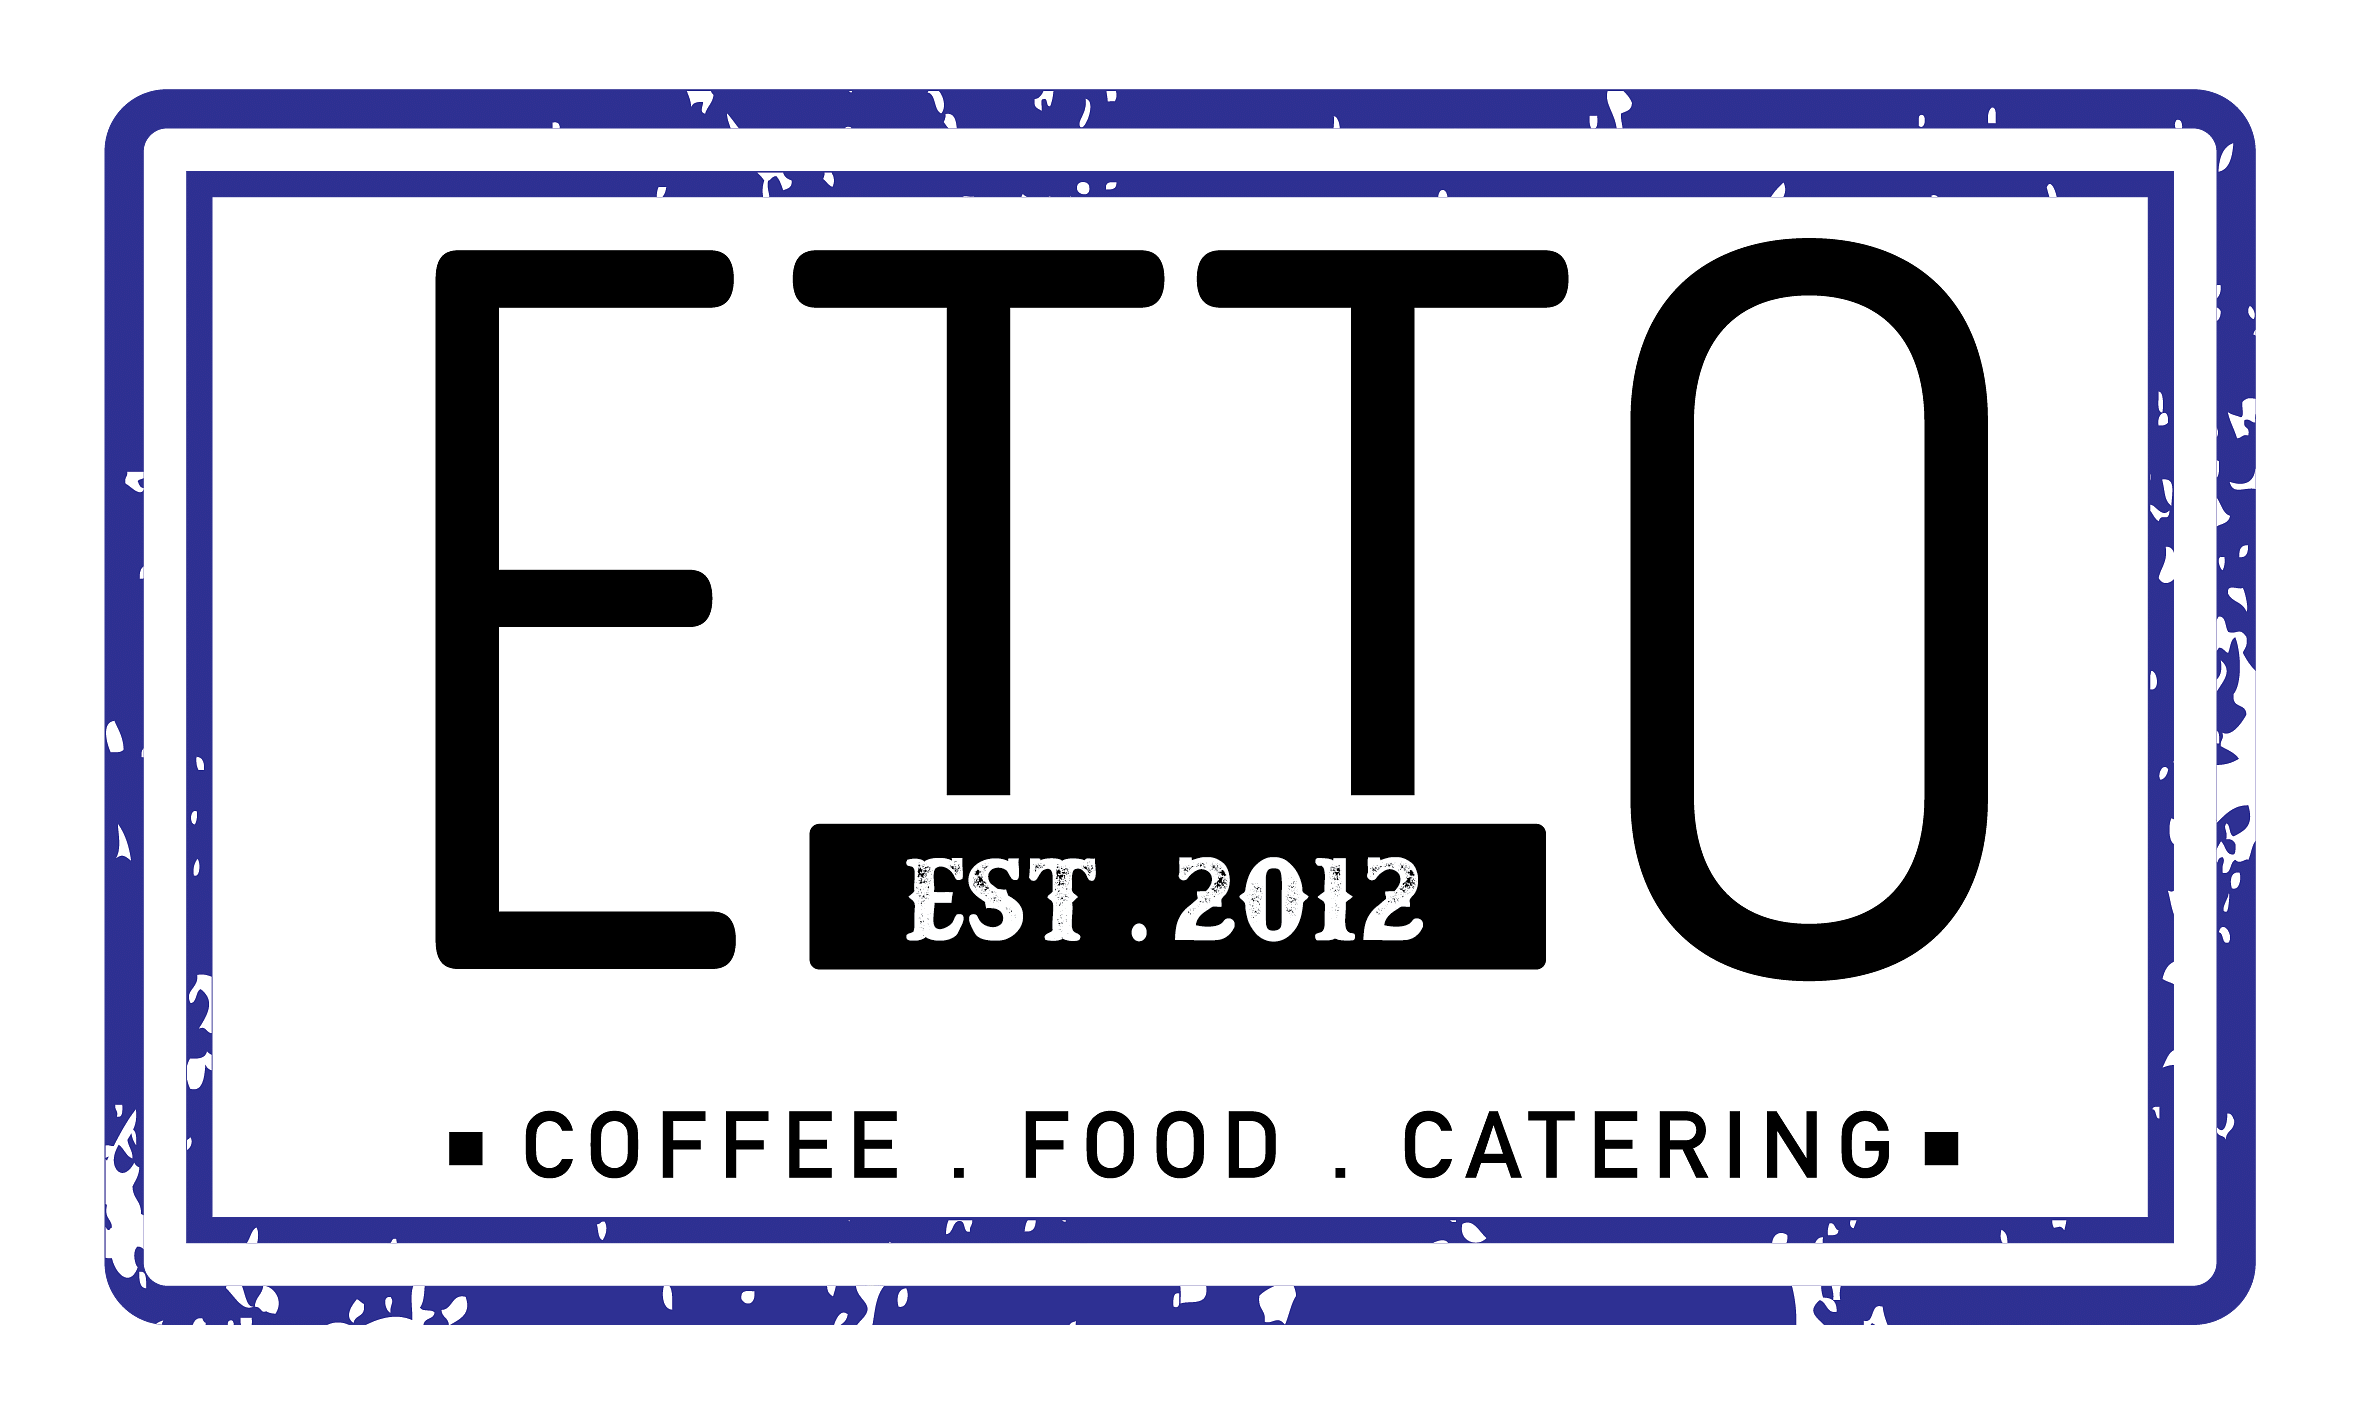 Logo for Etto Catering